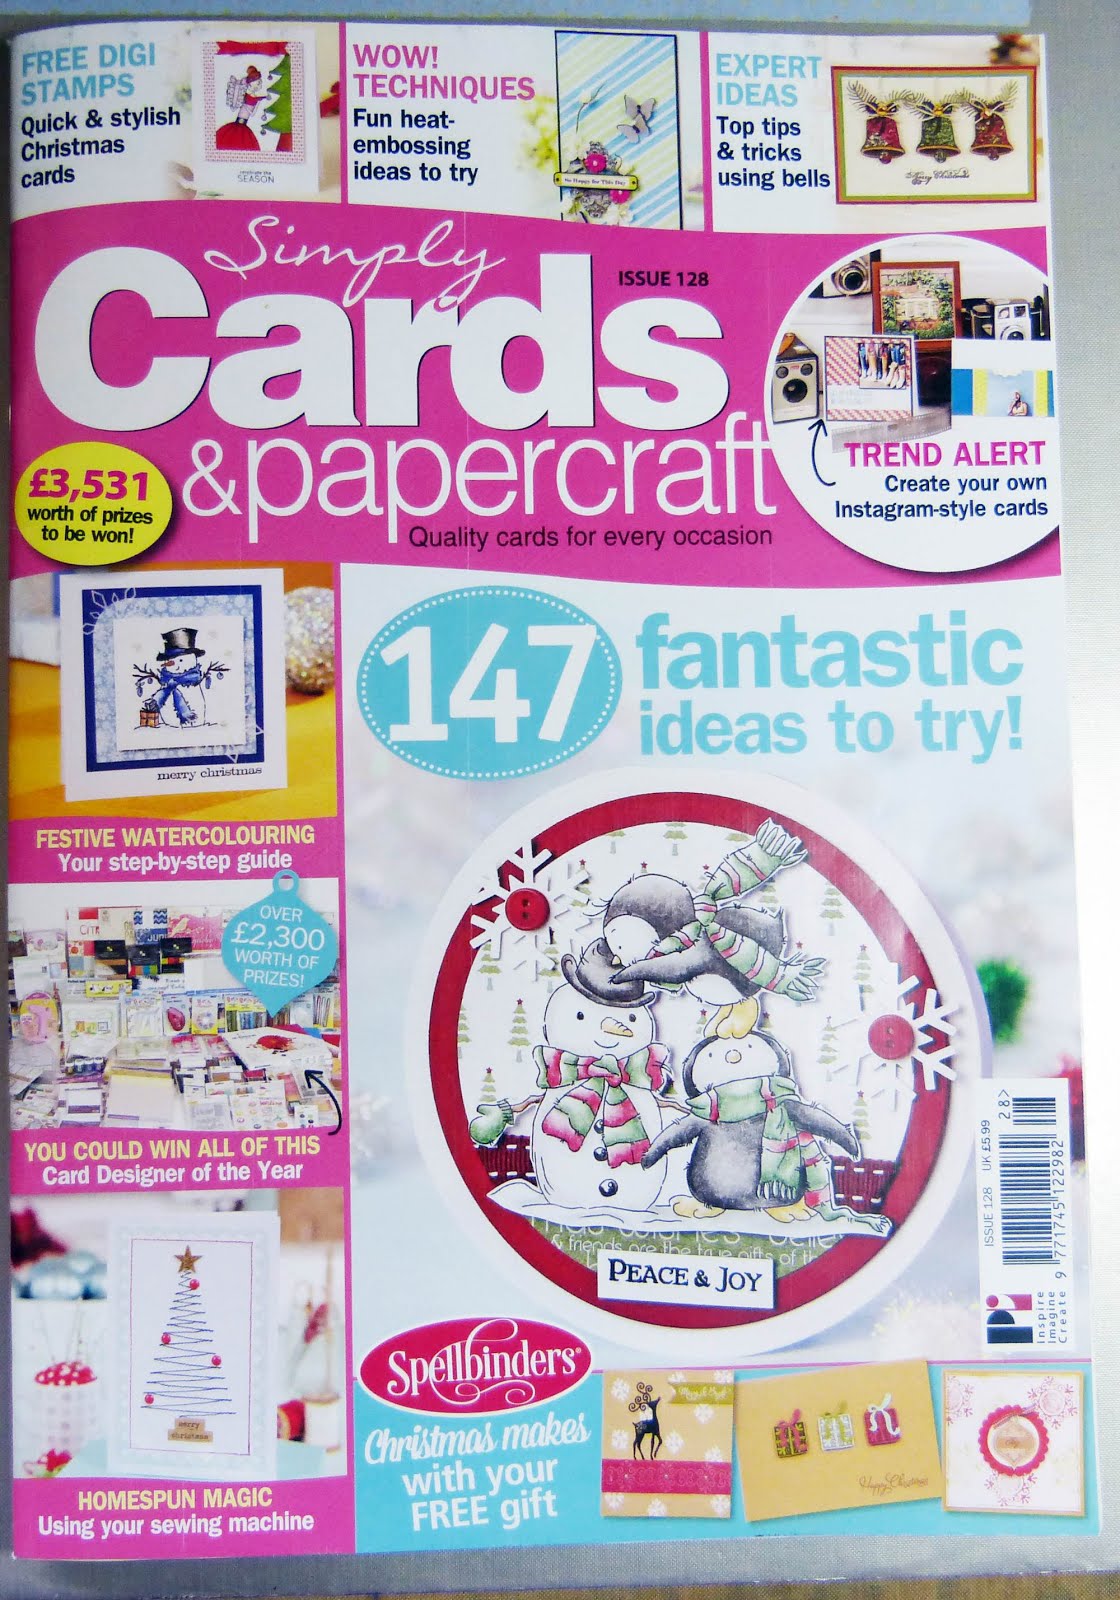 Published Simply Cards & Paper Crafts Issue 128